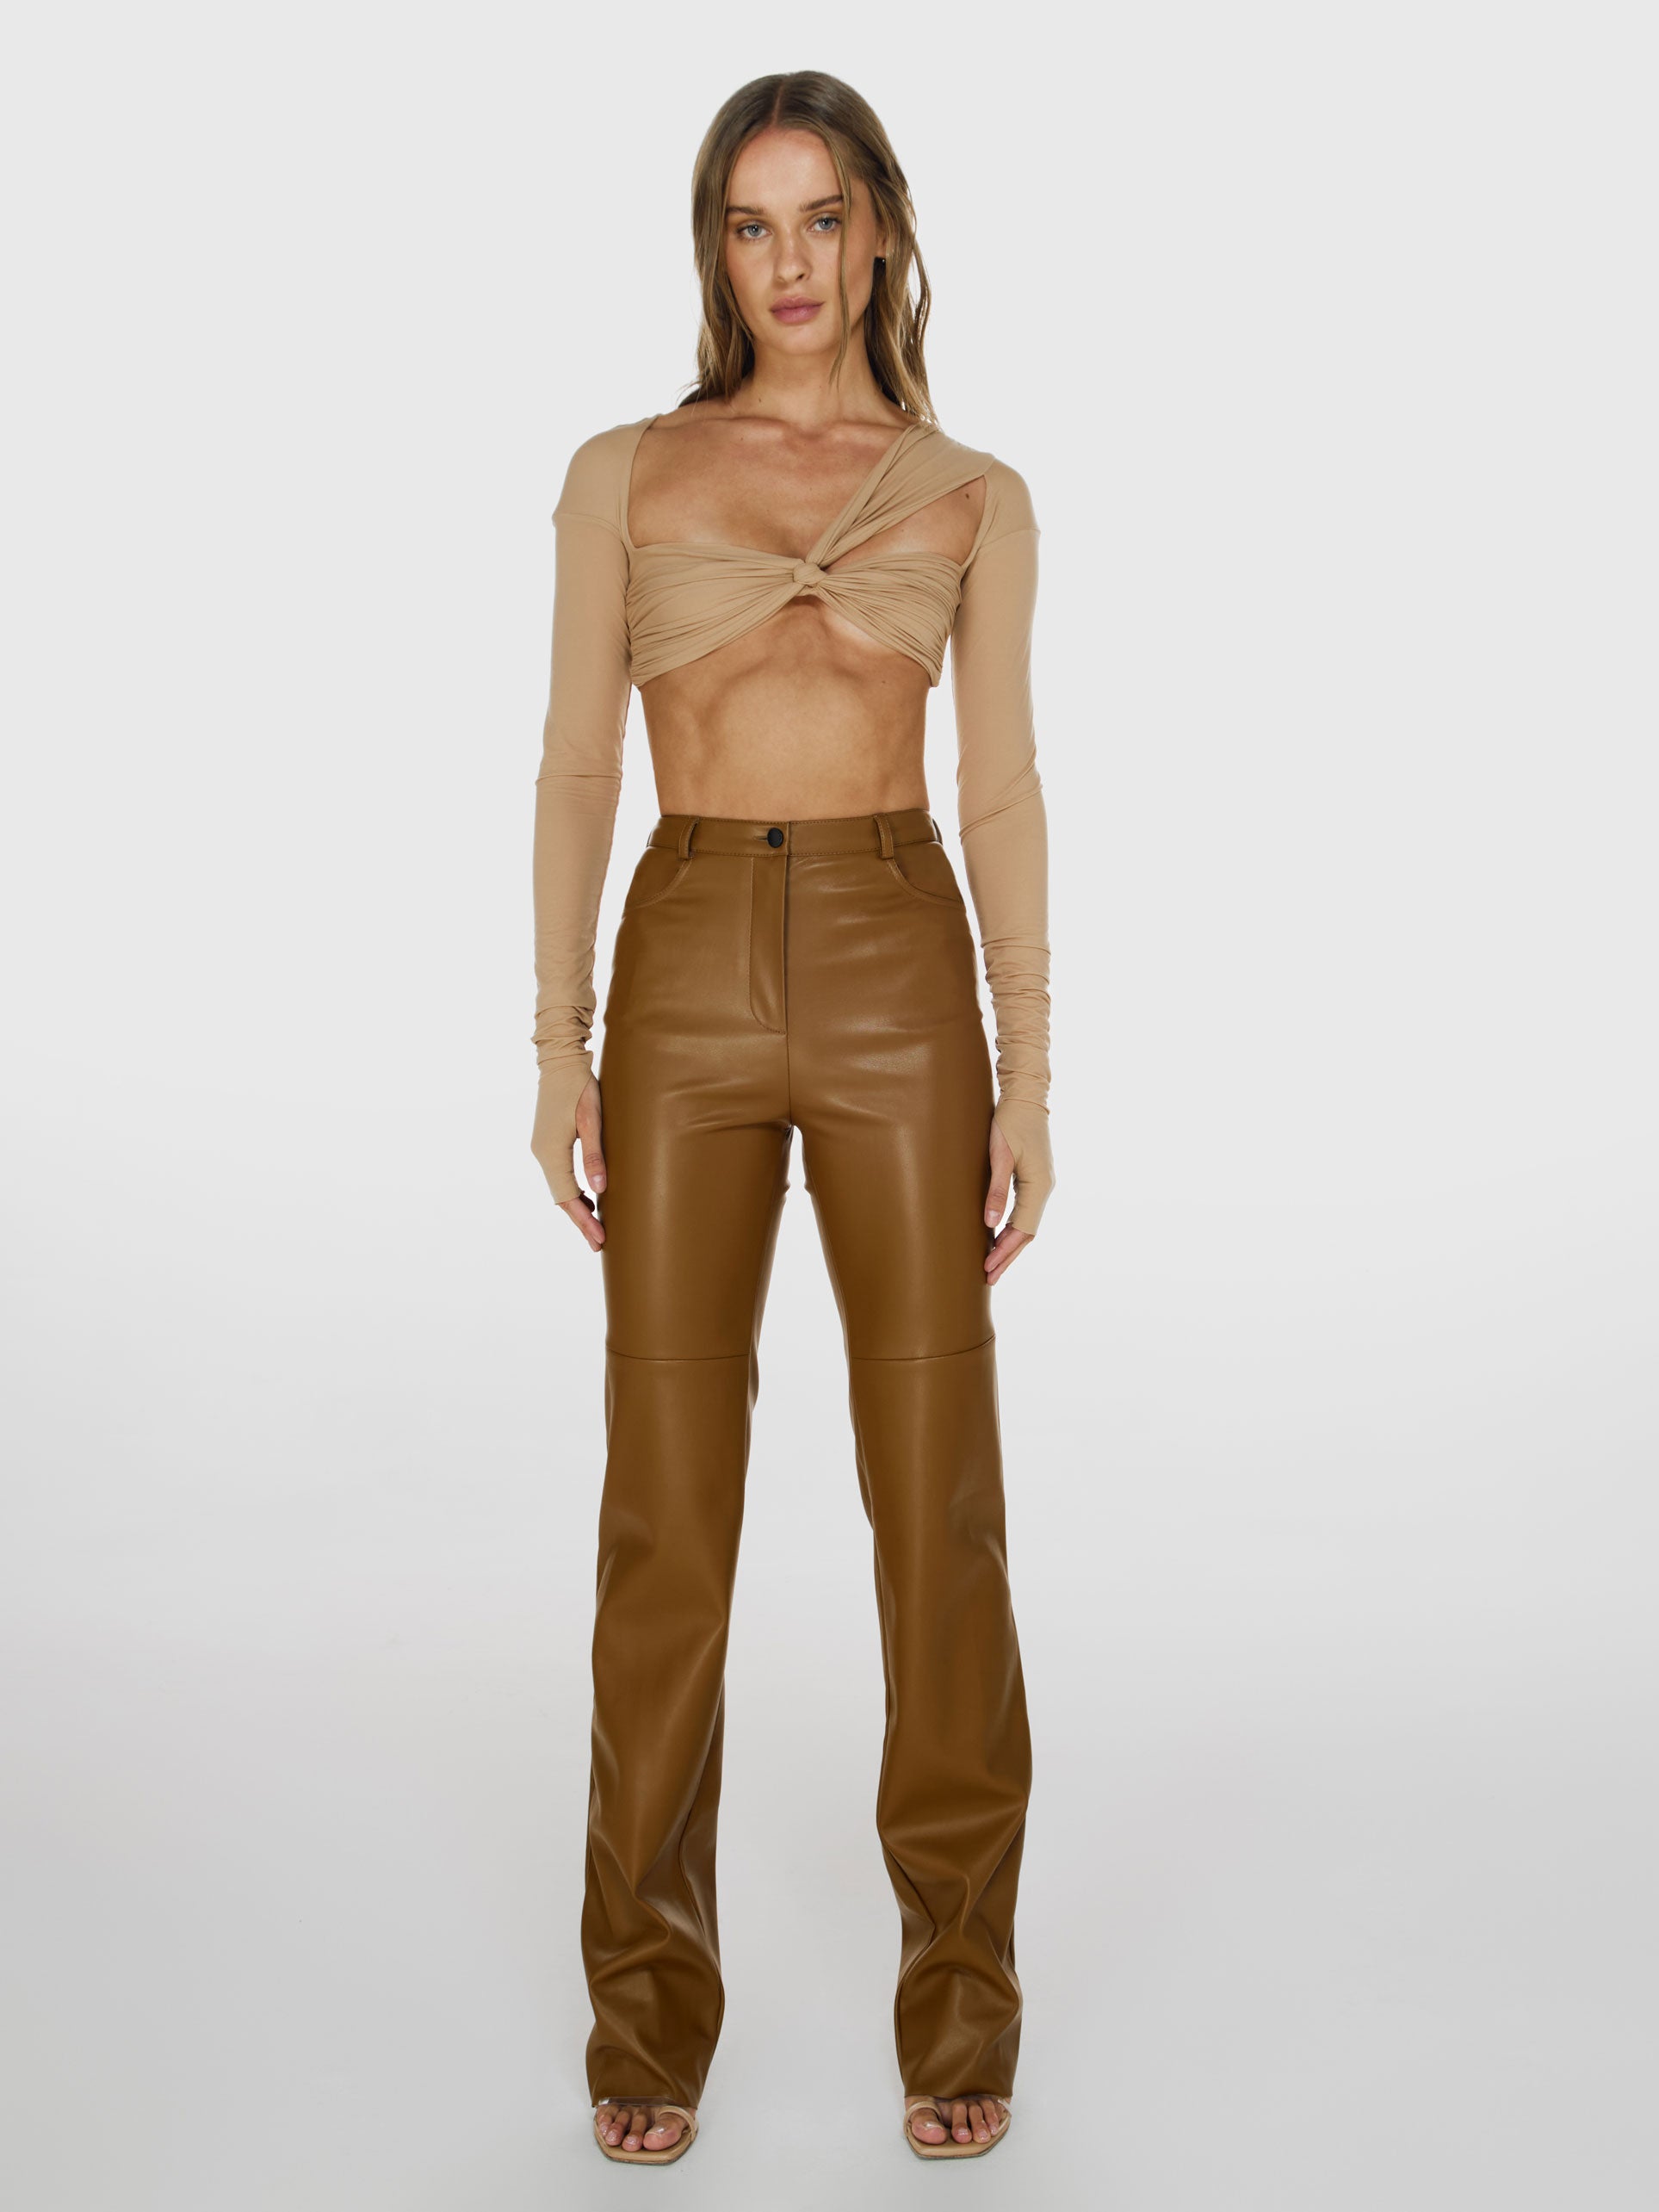 Full shot of a girl in a beige long sleeved crop top and brown vegan leather pants with straight leg